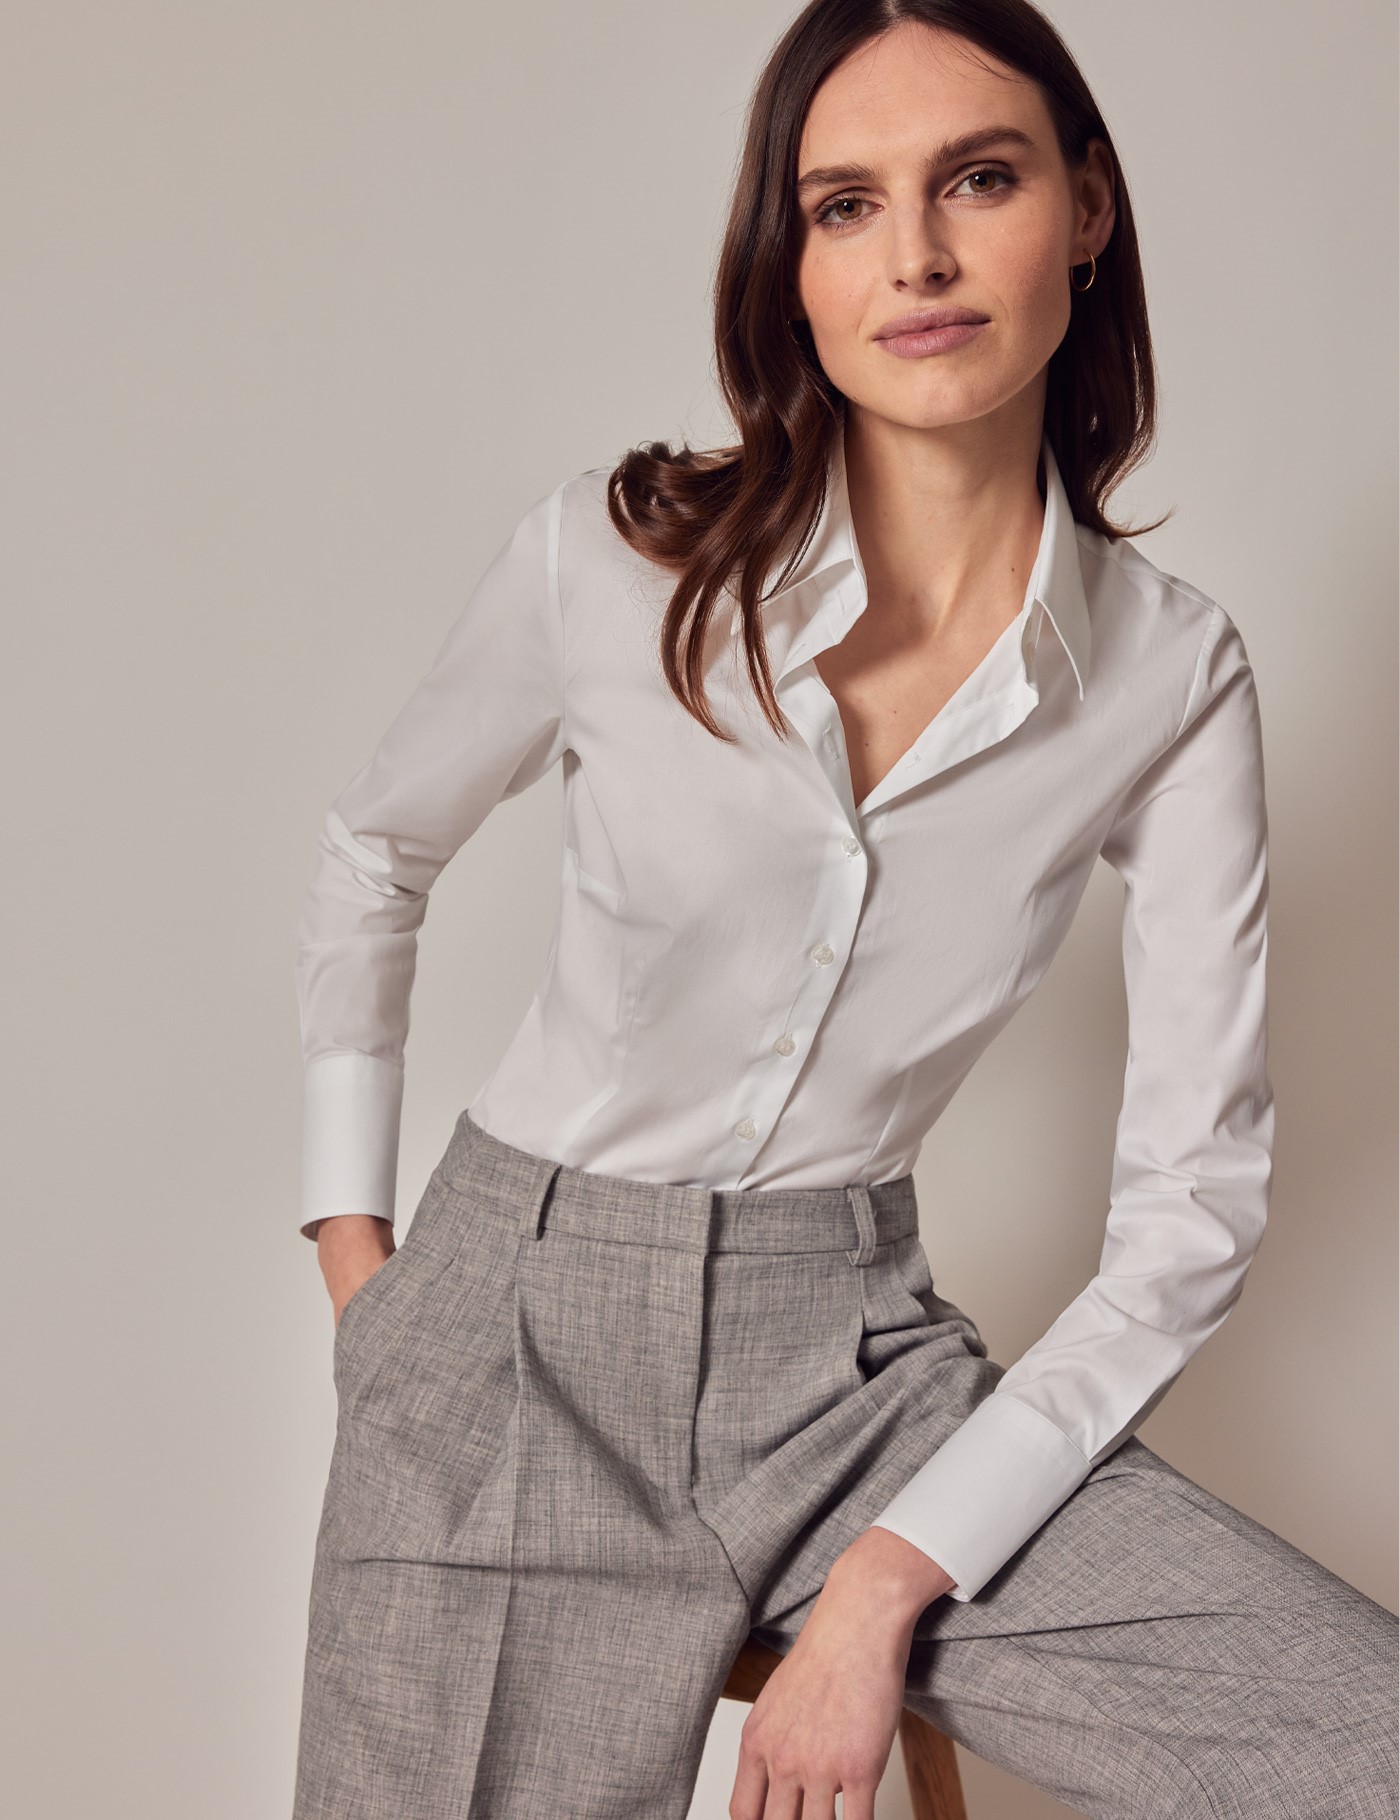 Women's White Fitted Shirt with High Two Button Collar